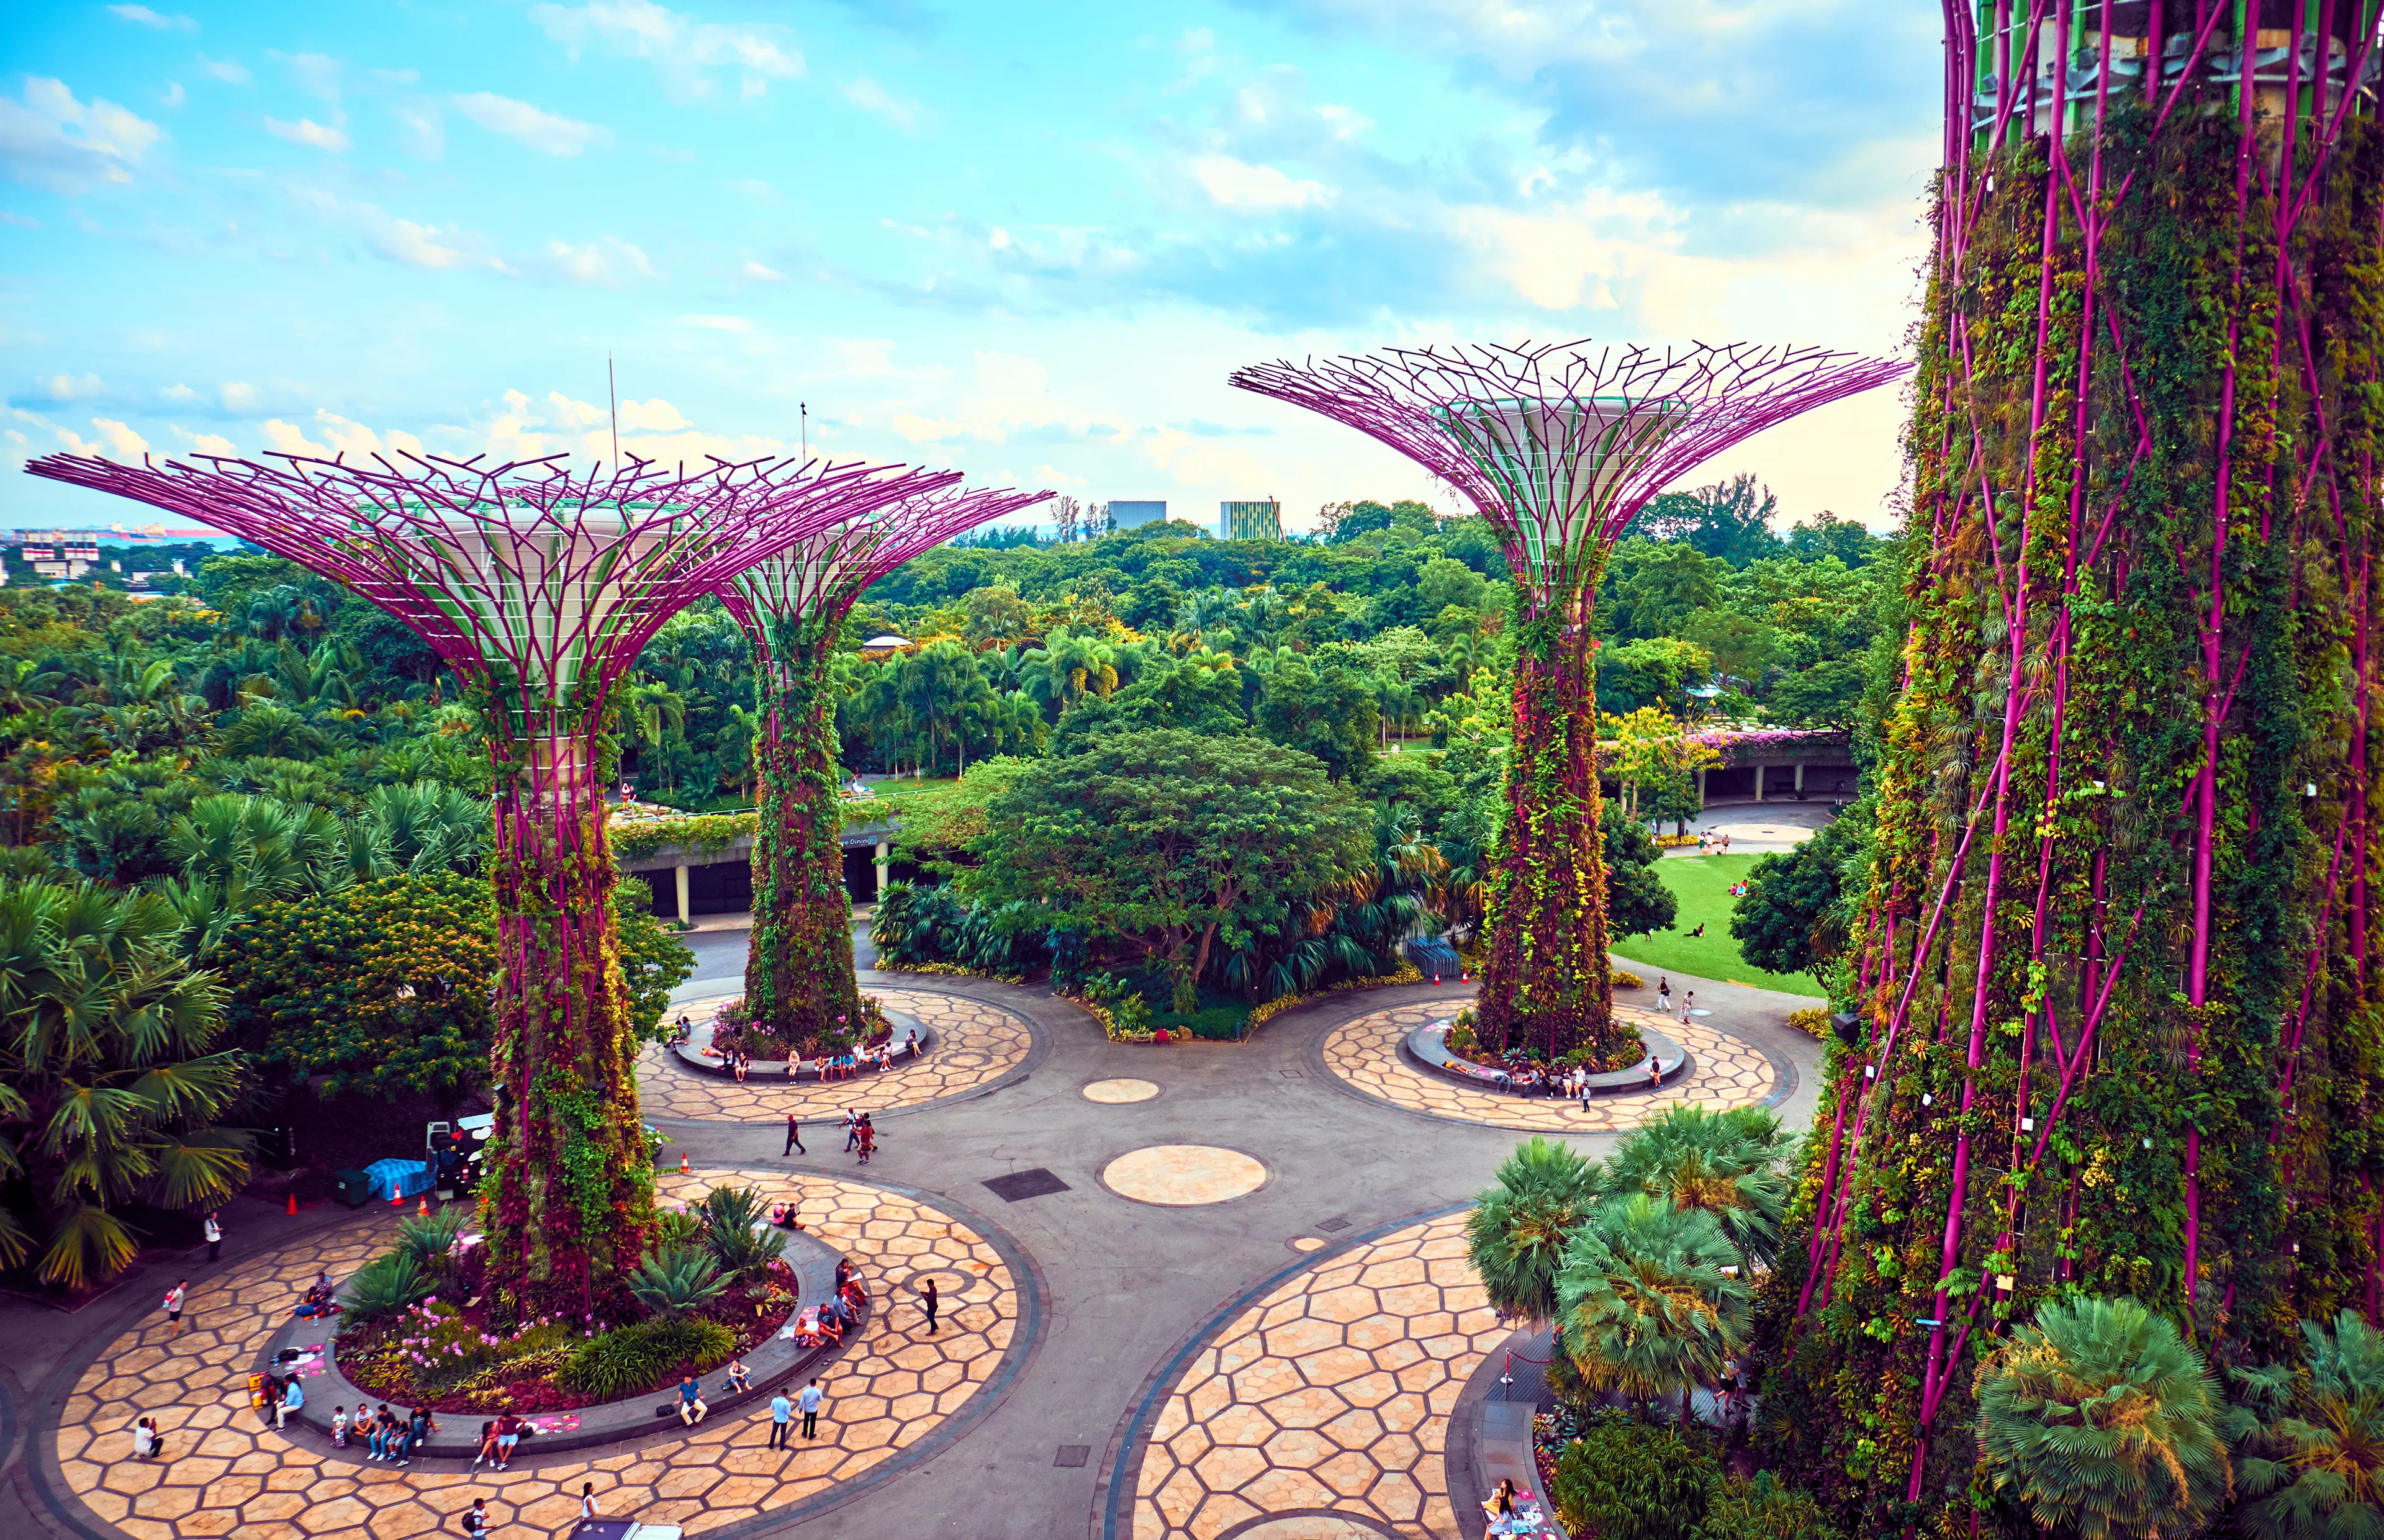 Gardens by the Bay with Supertree